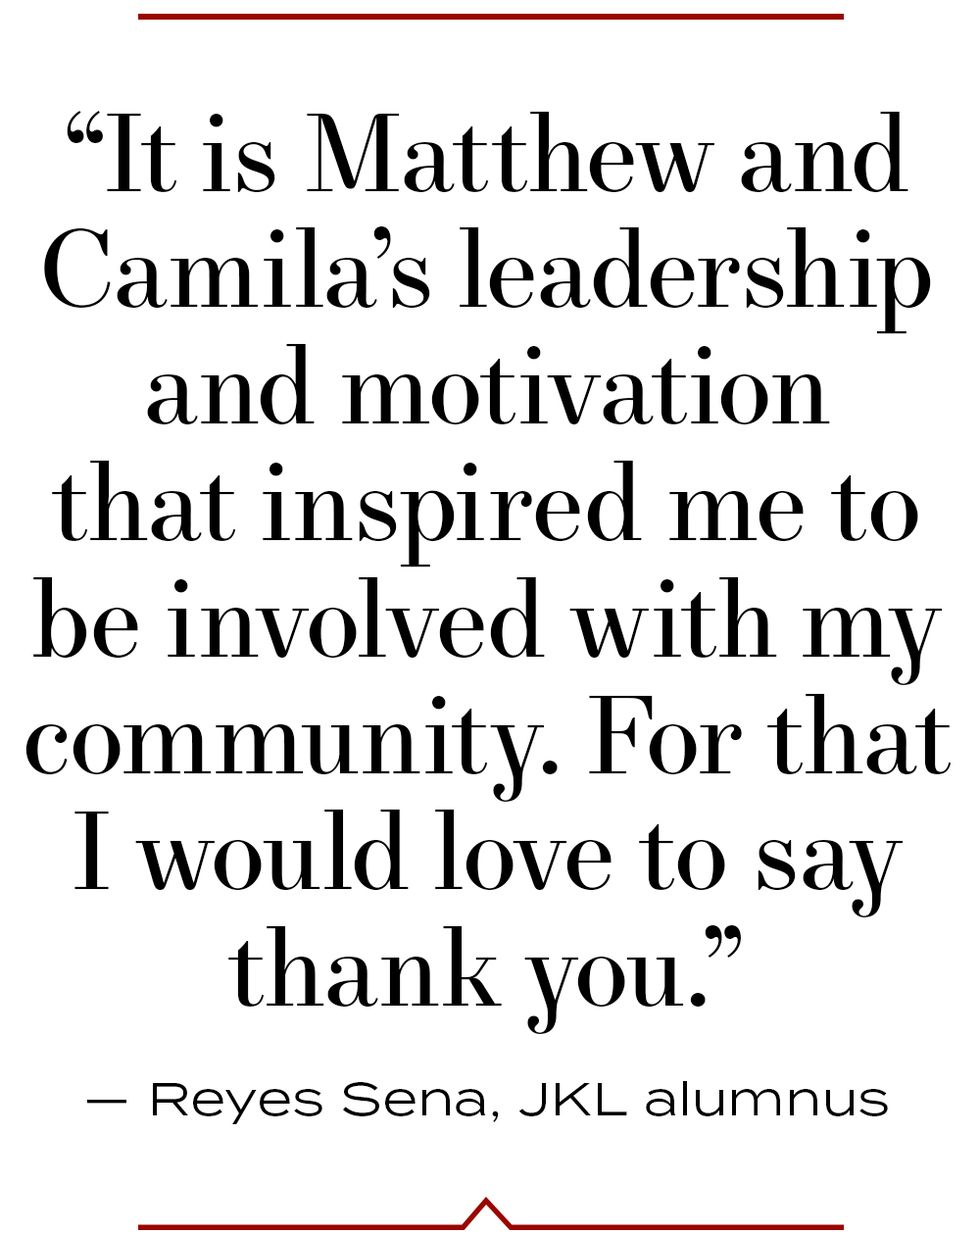 “it is matthew and camila’s leadership and motivation that inspired me to be involved with my community for that i would love to say thank you” — reyes sena, jkl alumnus